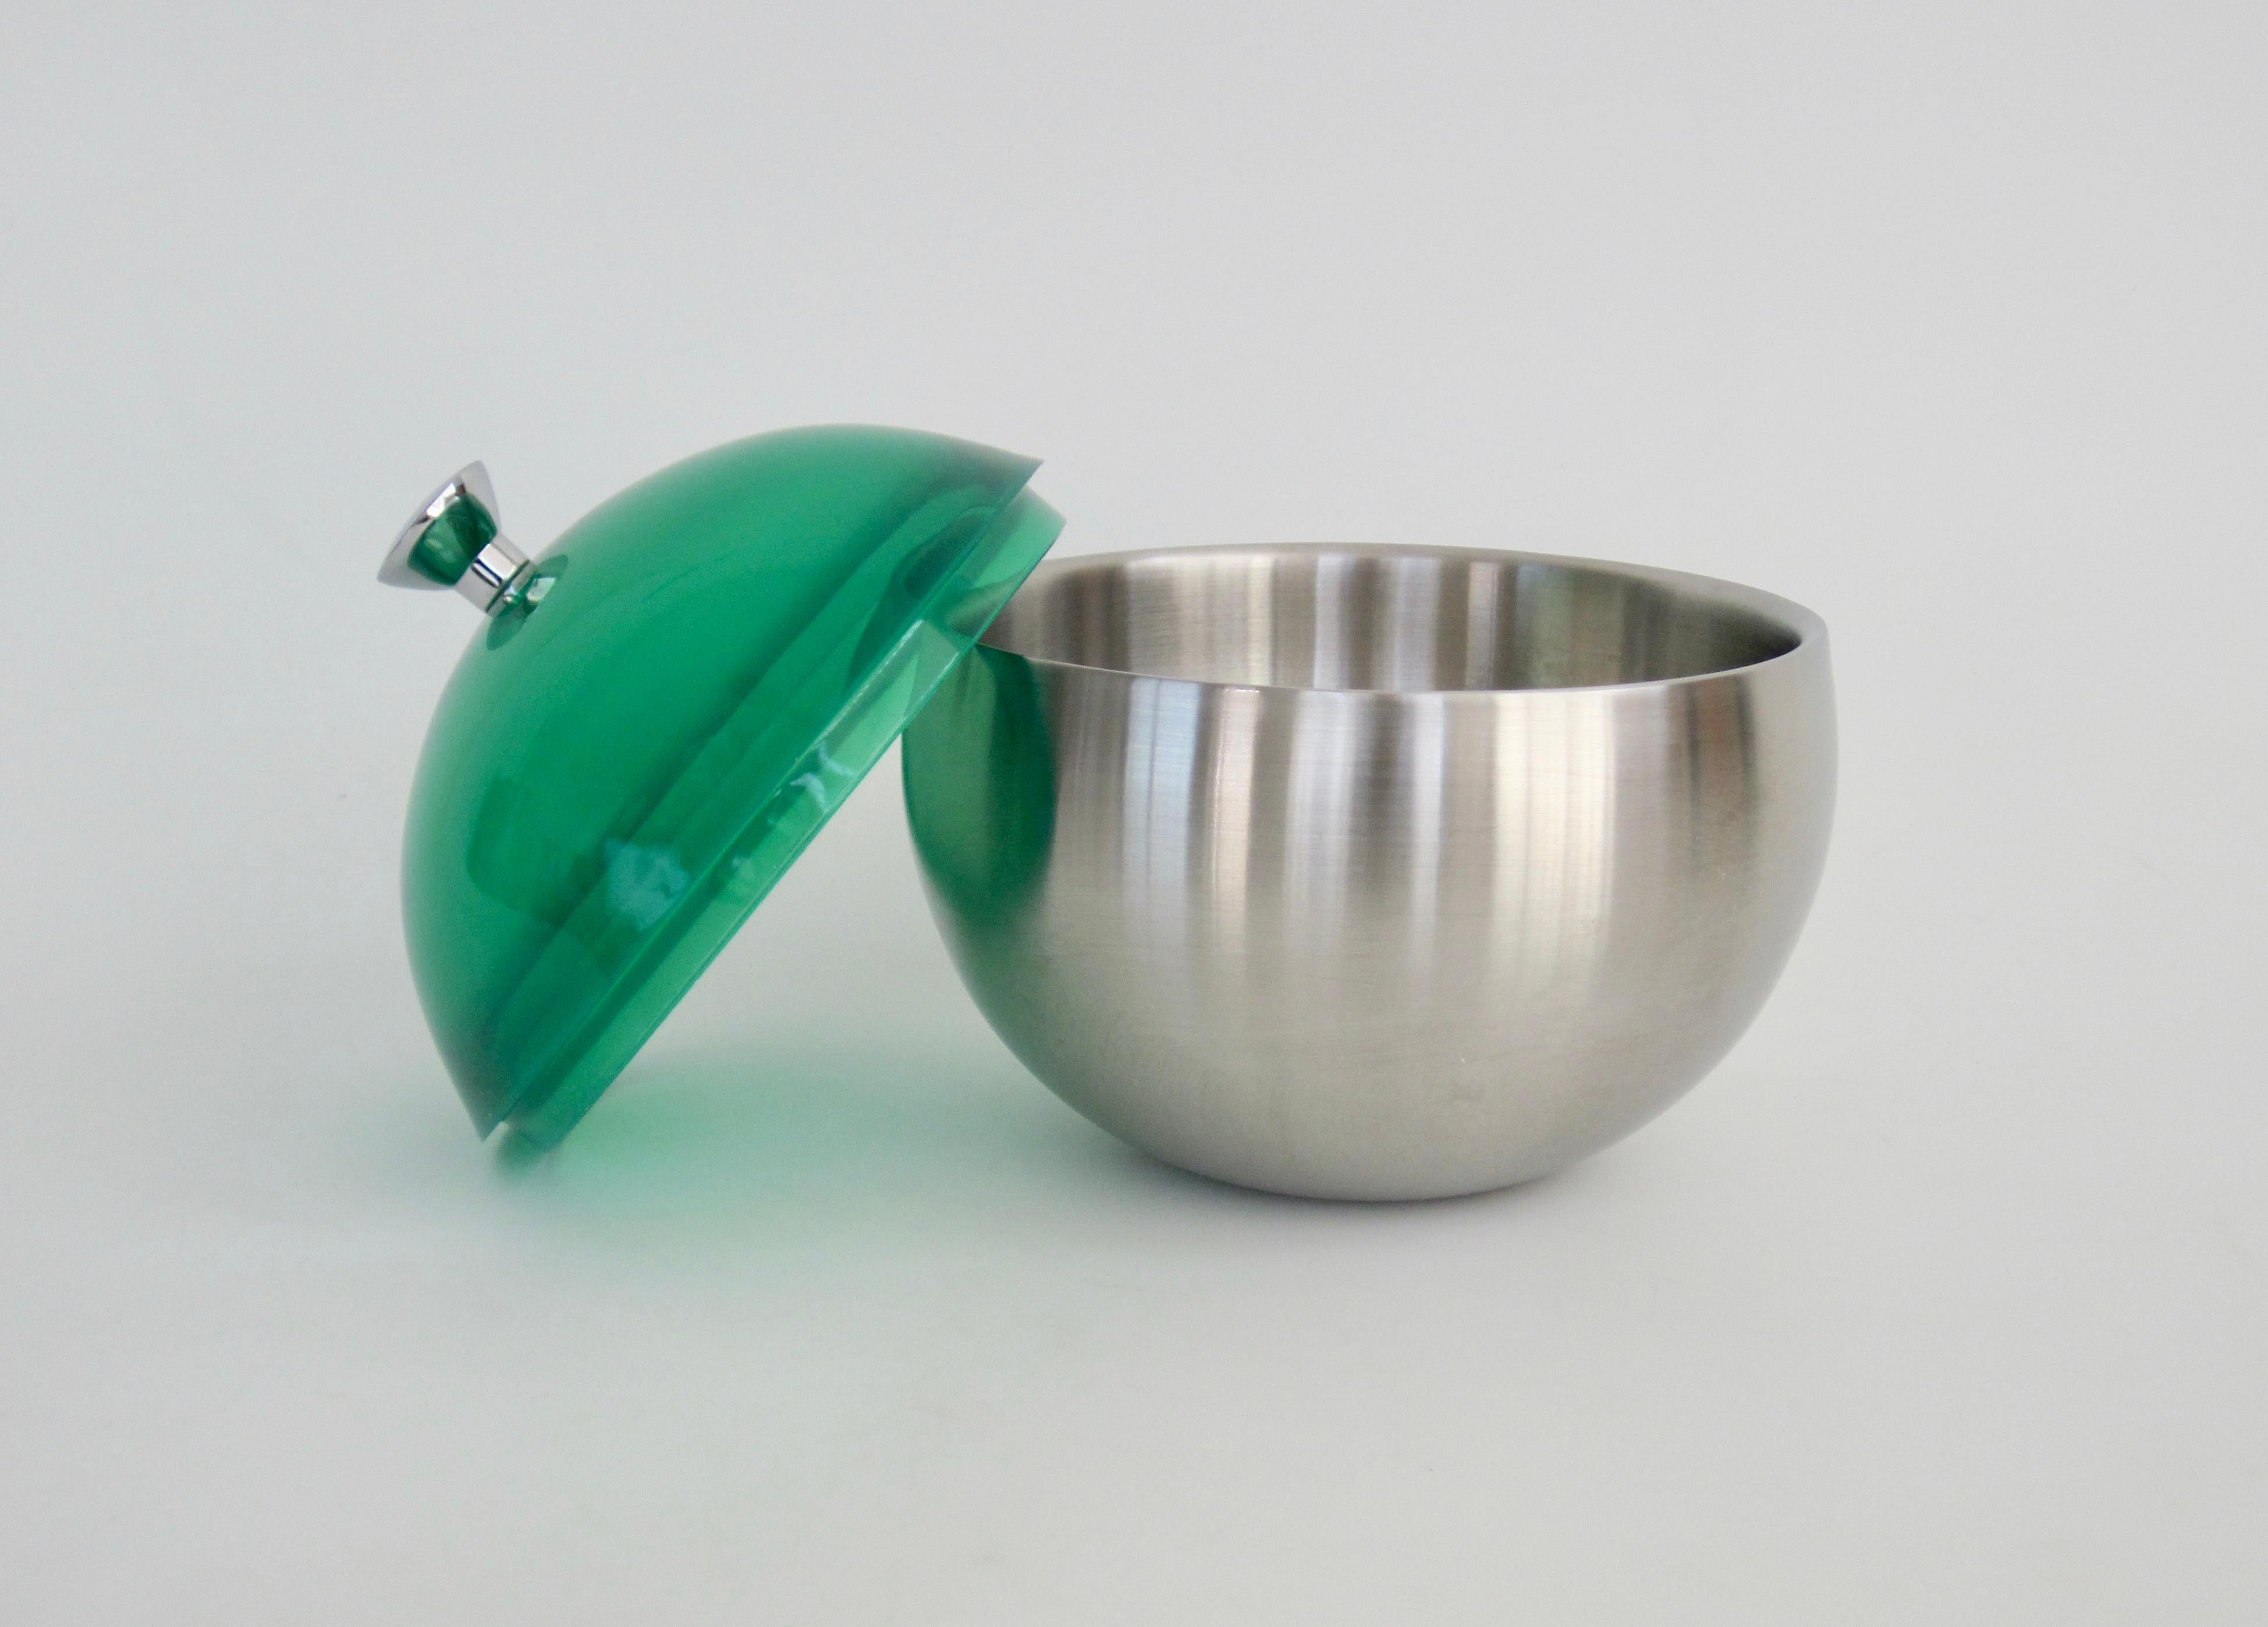 Orb shaped double wall stainless steel ice bucket and green lucite dome lid with knob handle Simplicity is what makes this a wonderful example of good design. The pop of color keeps it fun.